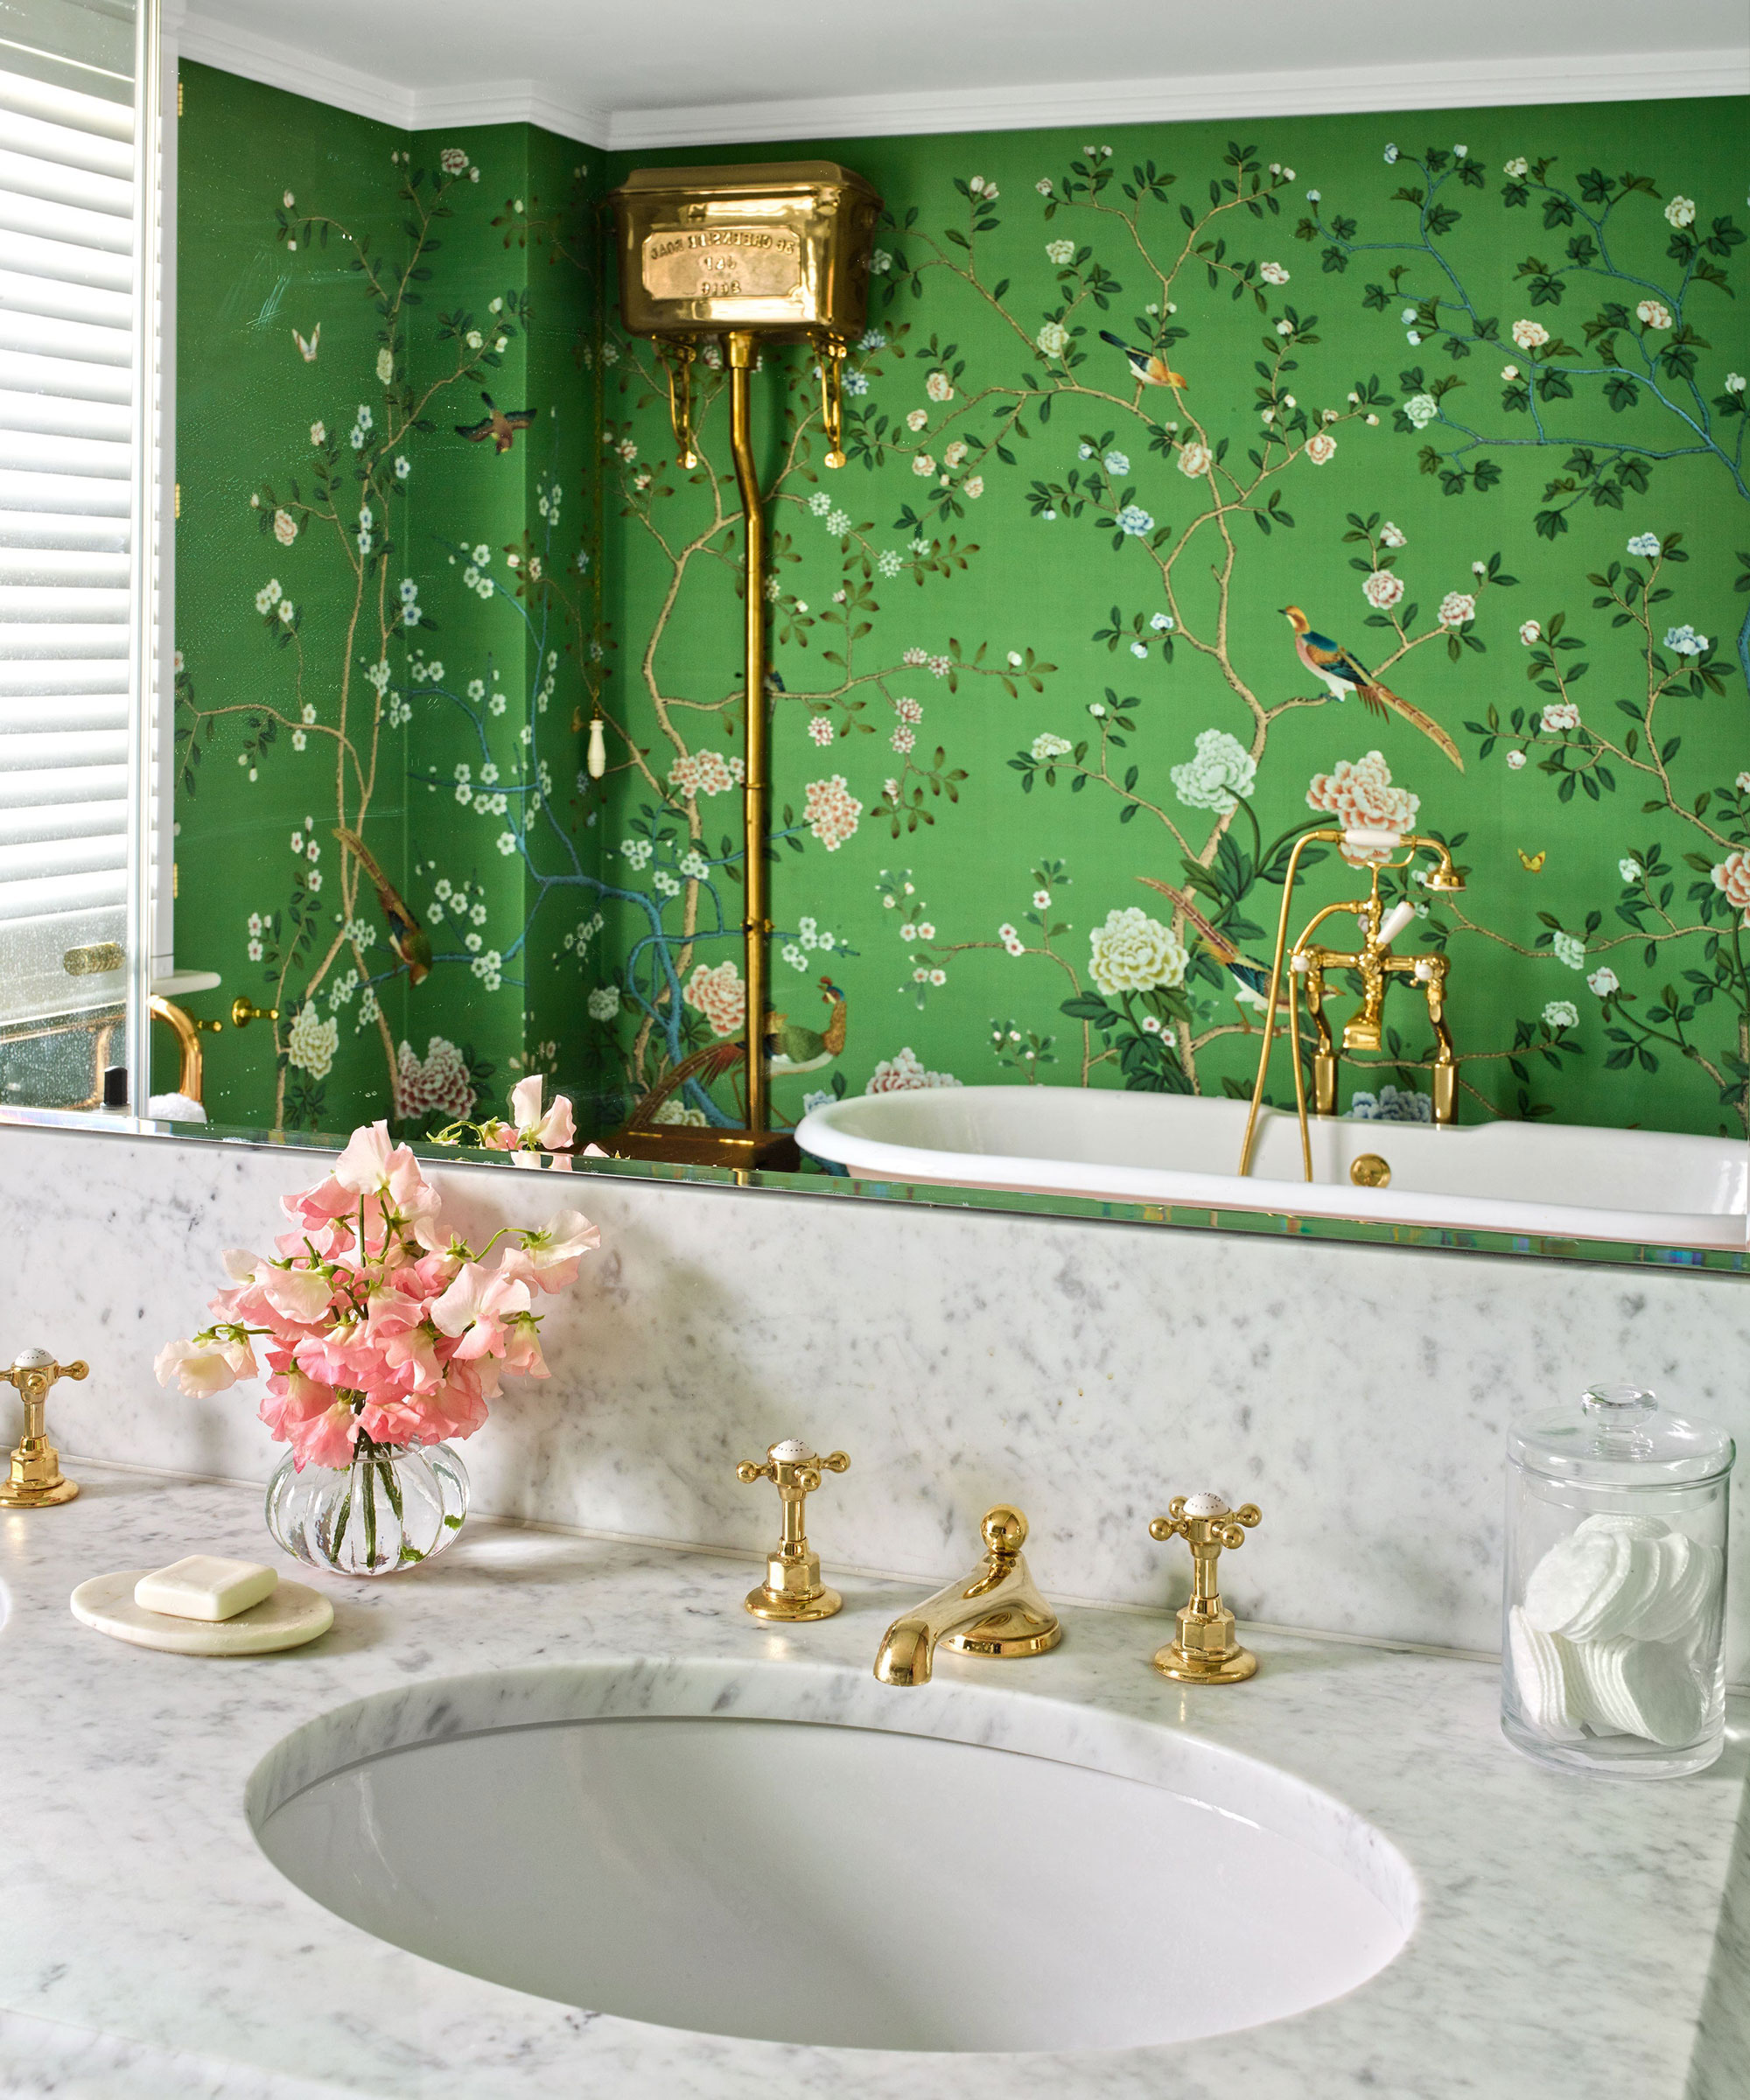 Is green is the new gray? Real Homes investigates | Real Homes